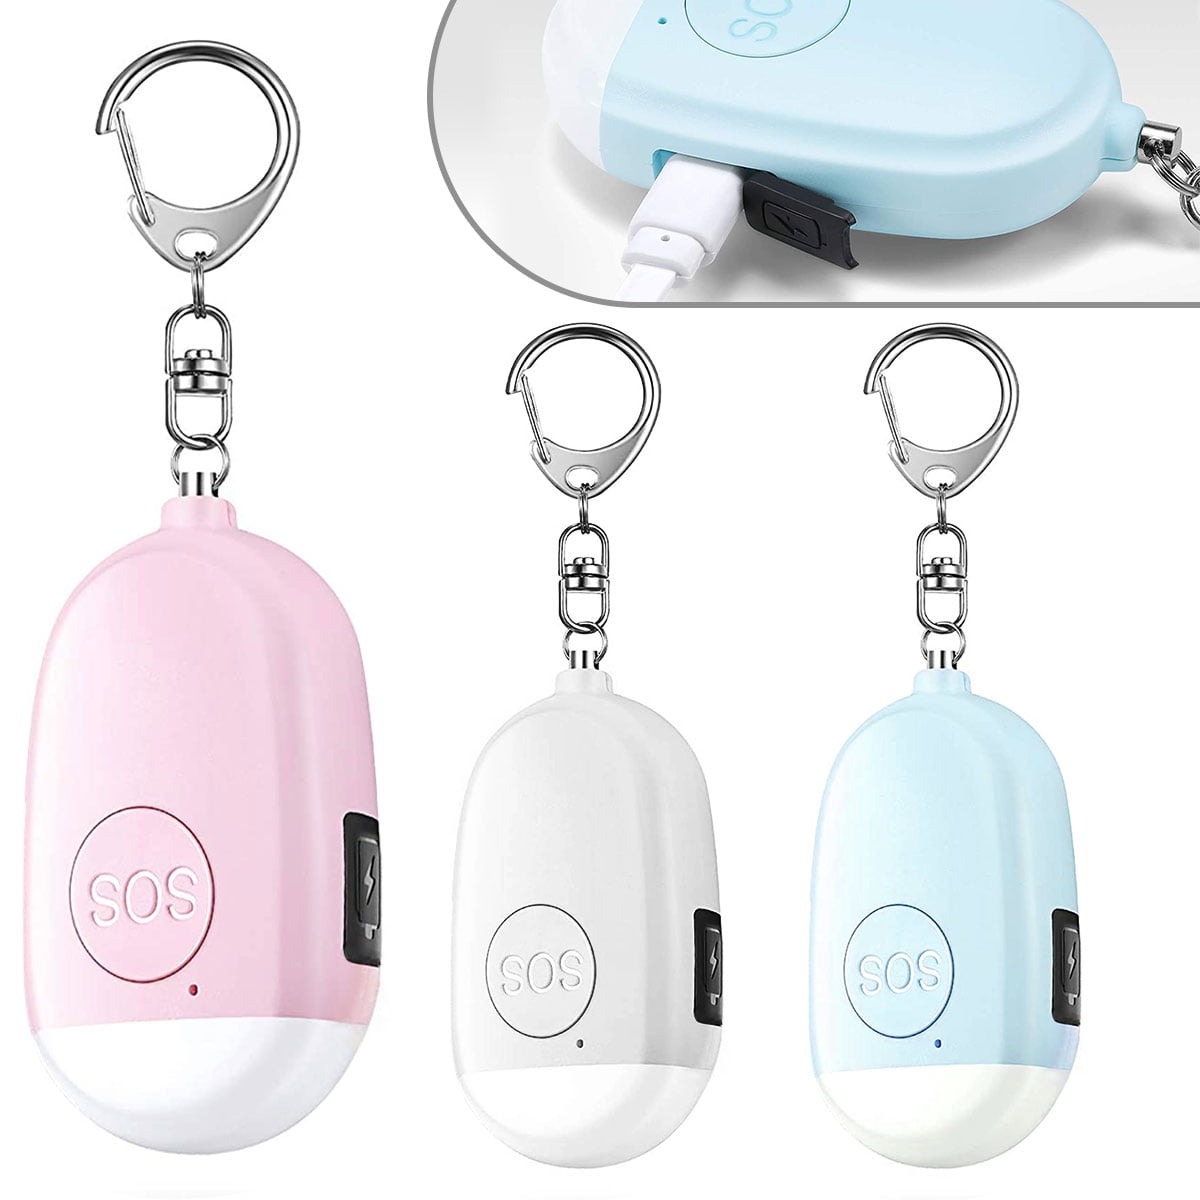 3 PACK Personal Alarm Keychain W Flashlight Protection Devices For Women Girls K 